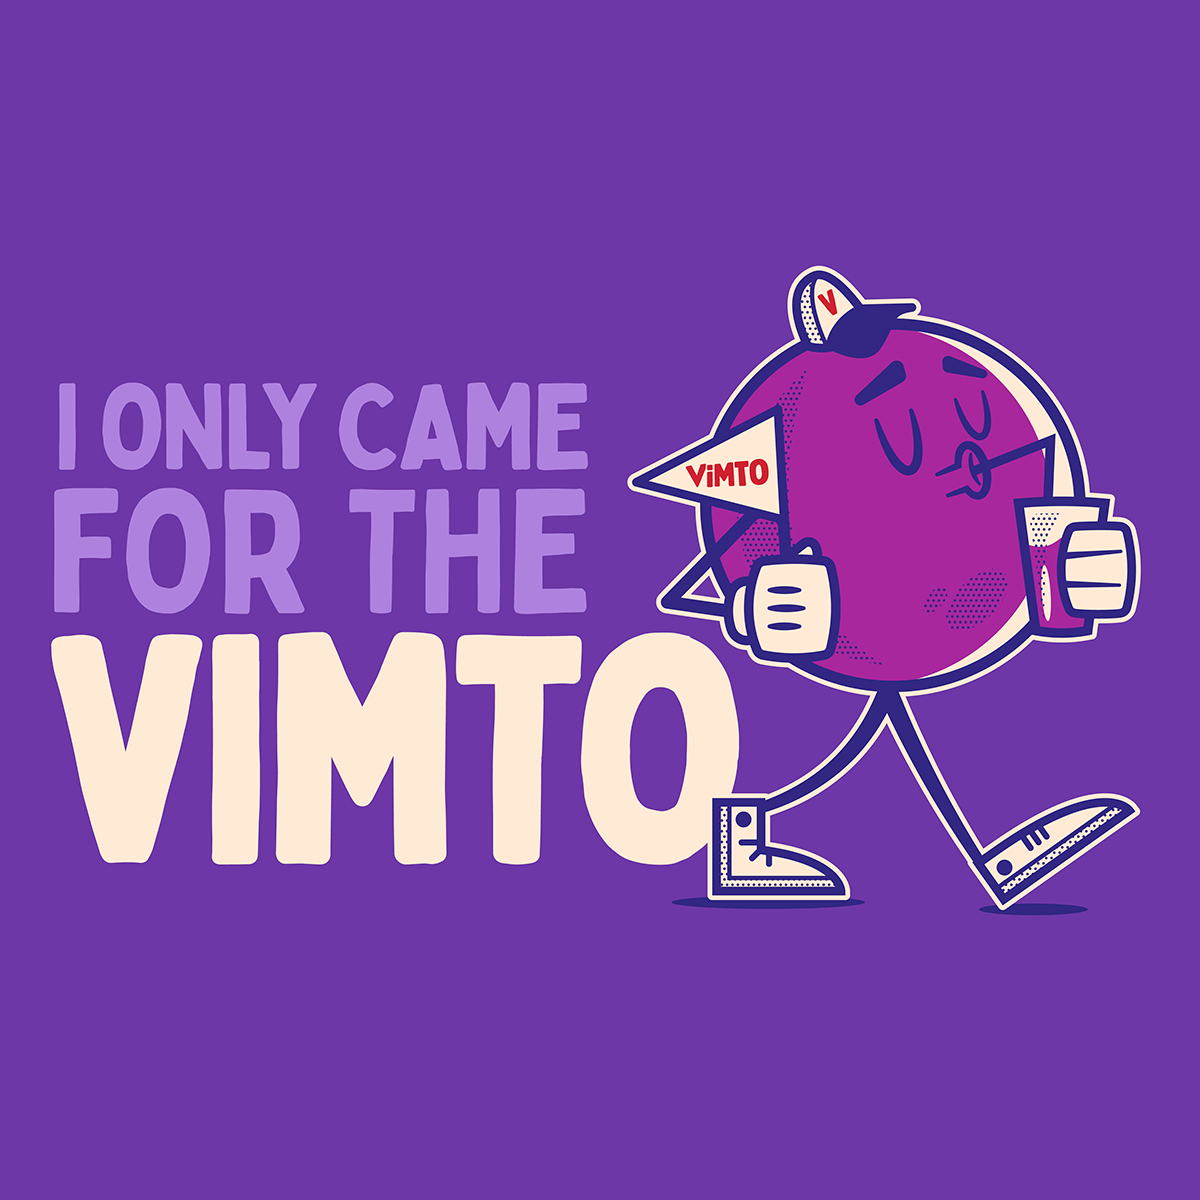 Various-Characters_VIMTO